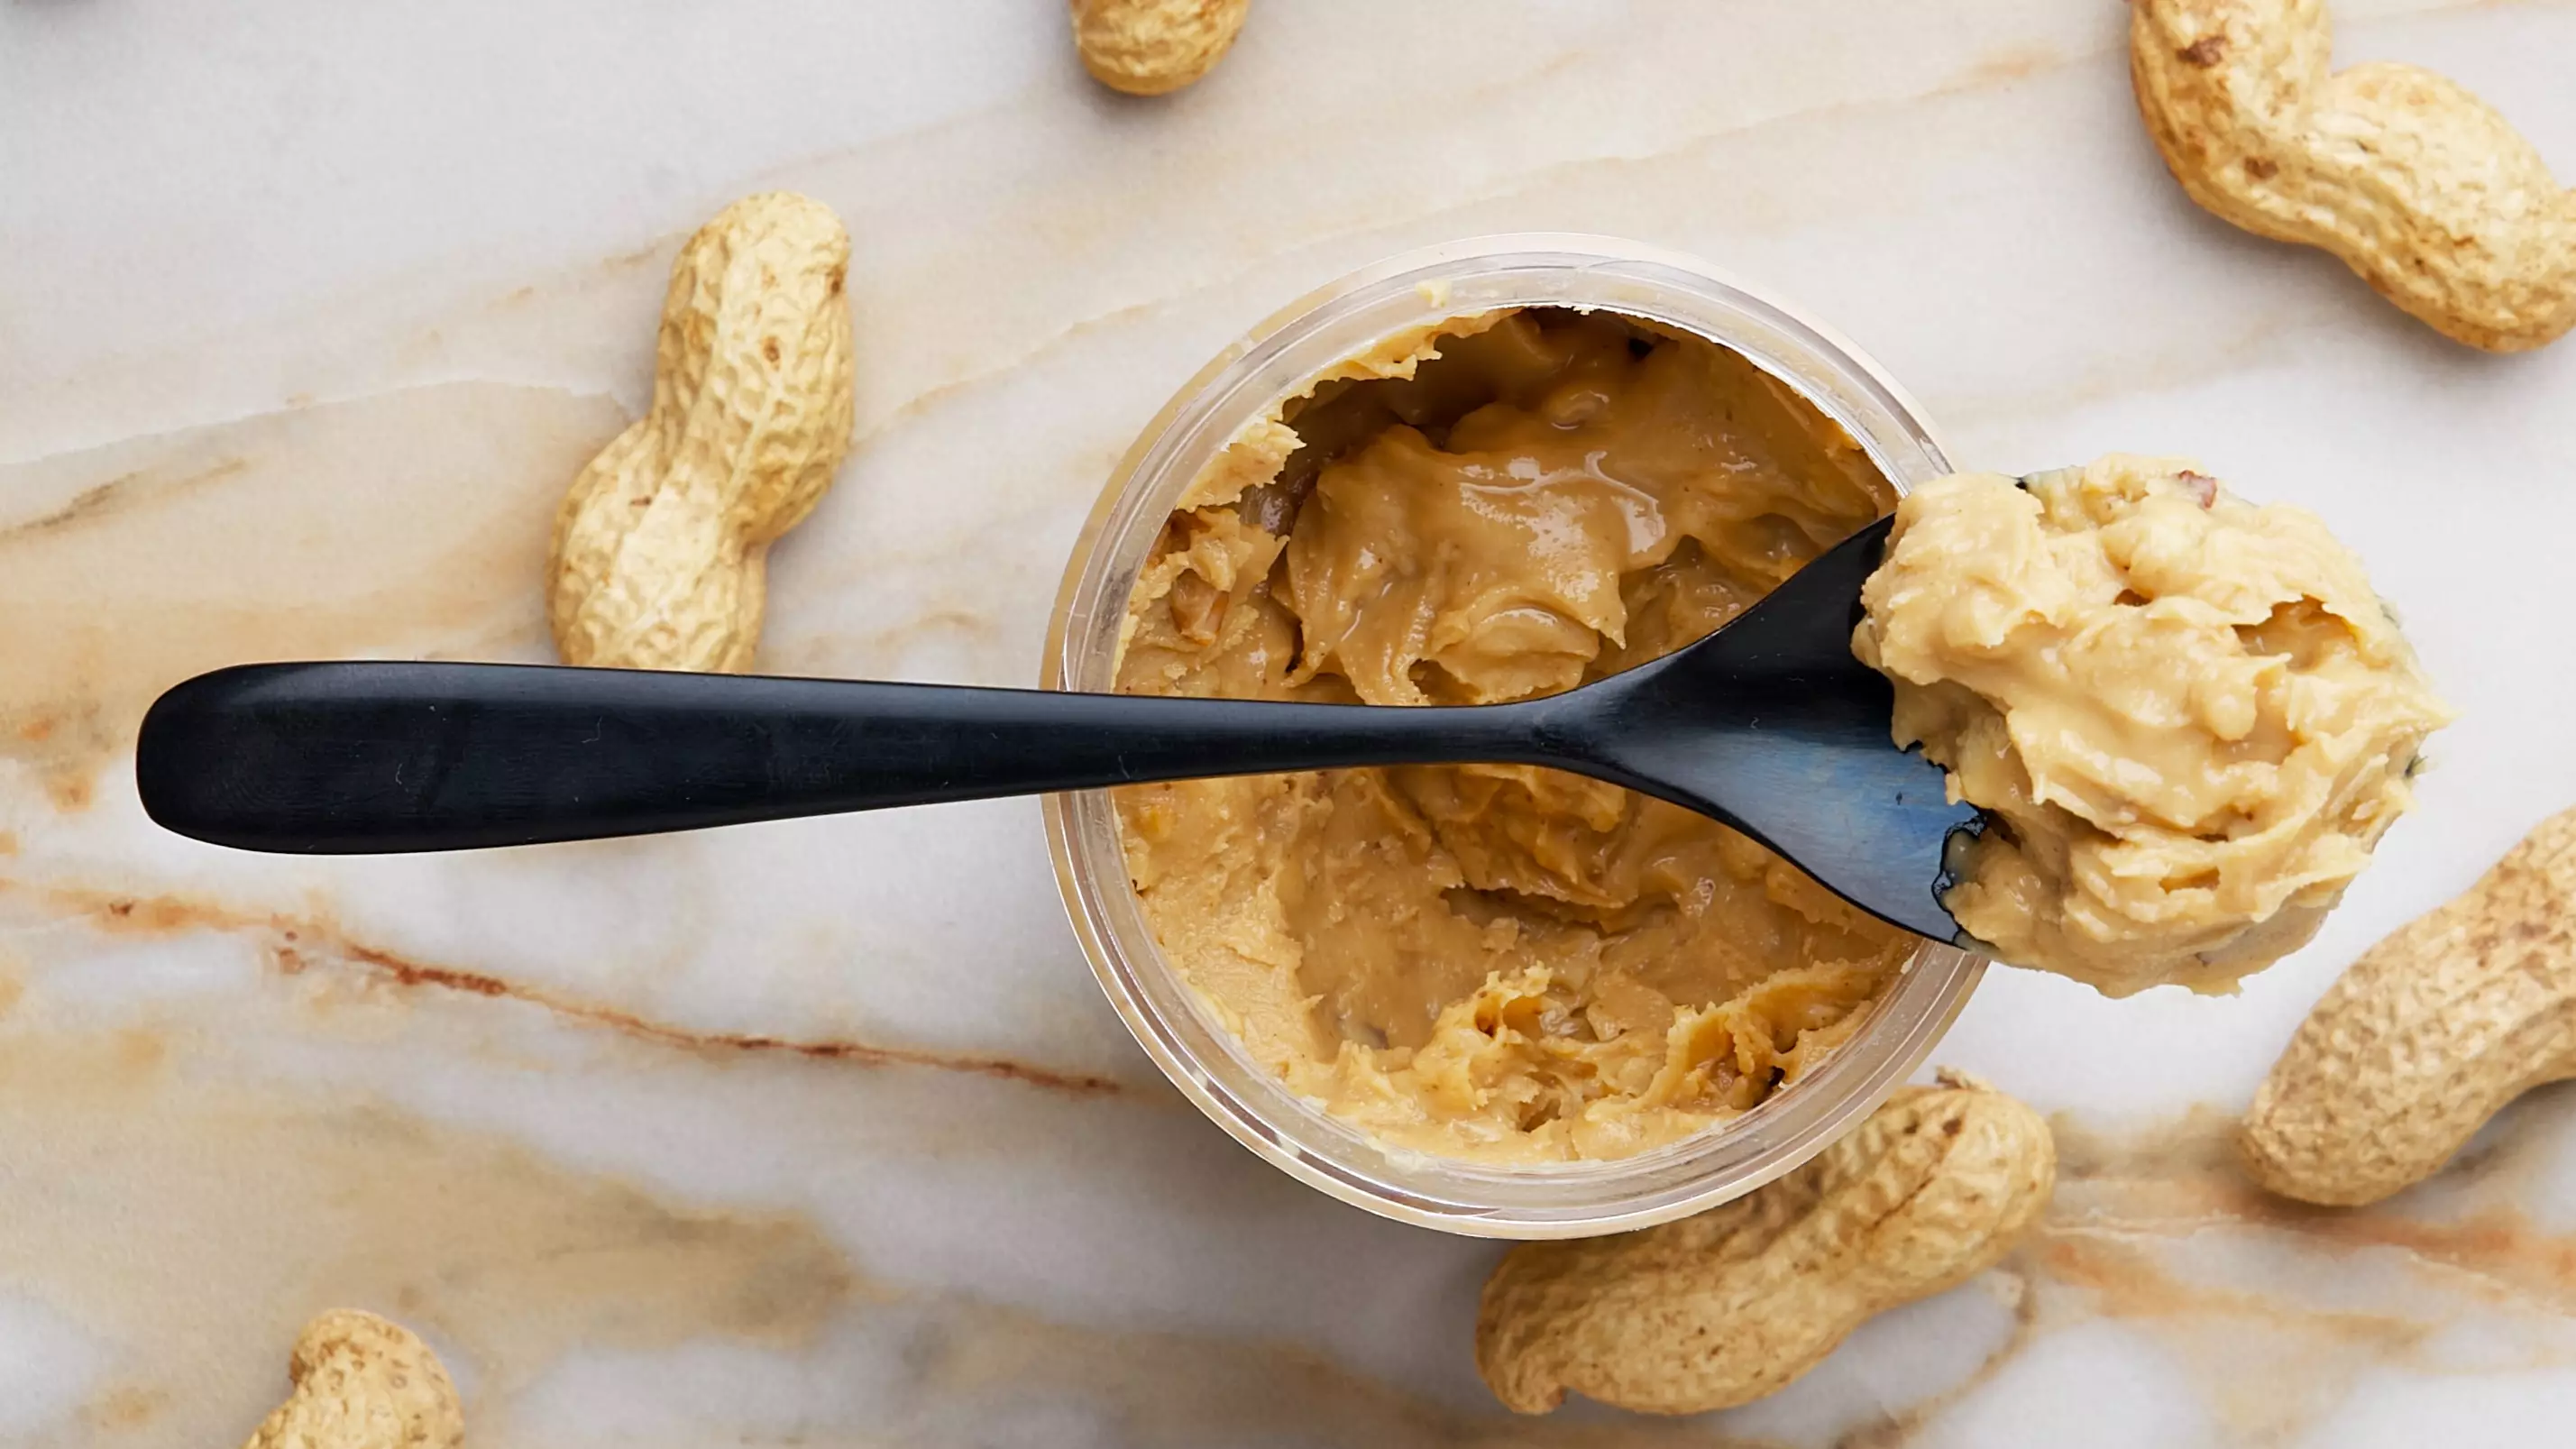 Whipped Peanut Butter Milk Is The TikTok Food Trend You Need To Try